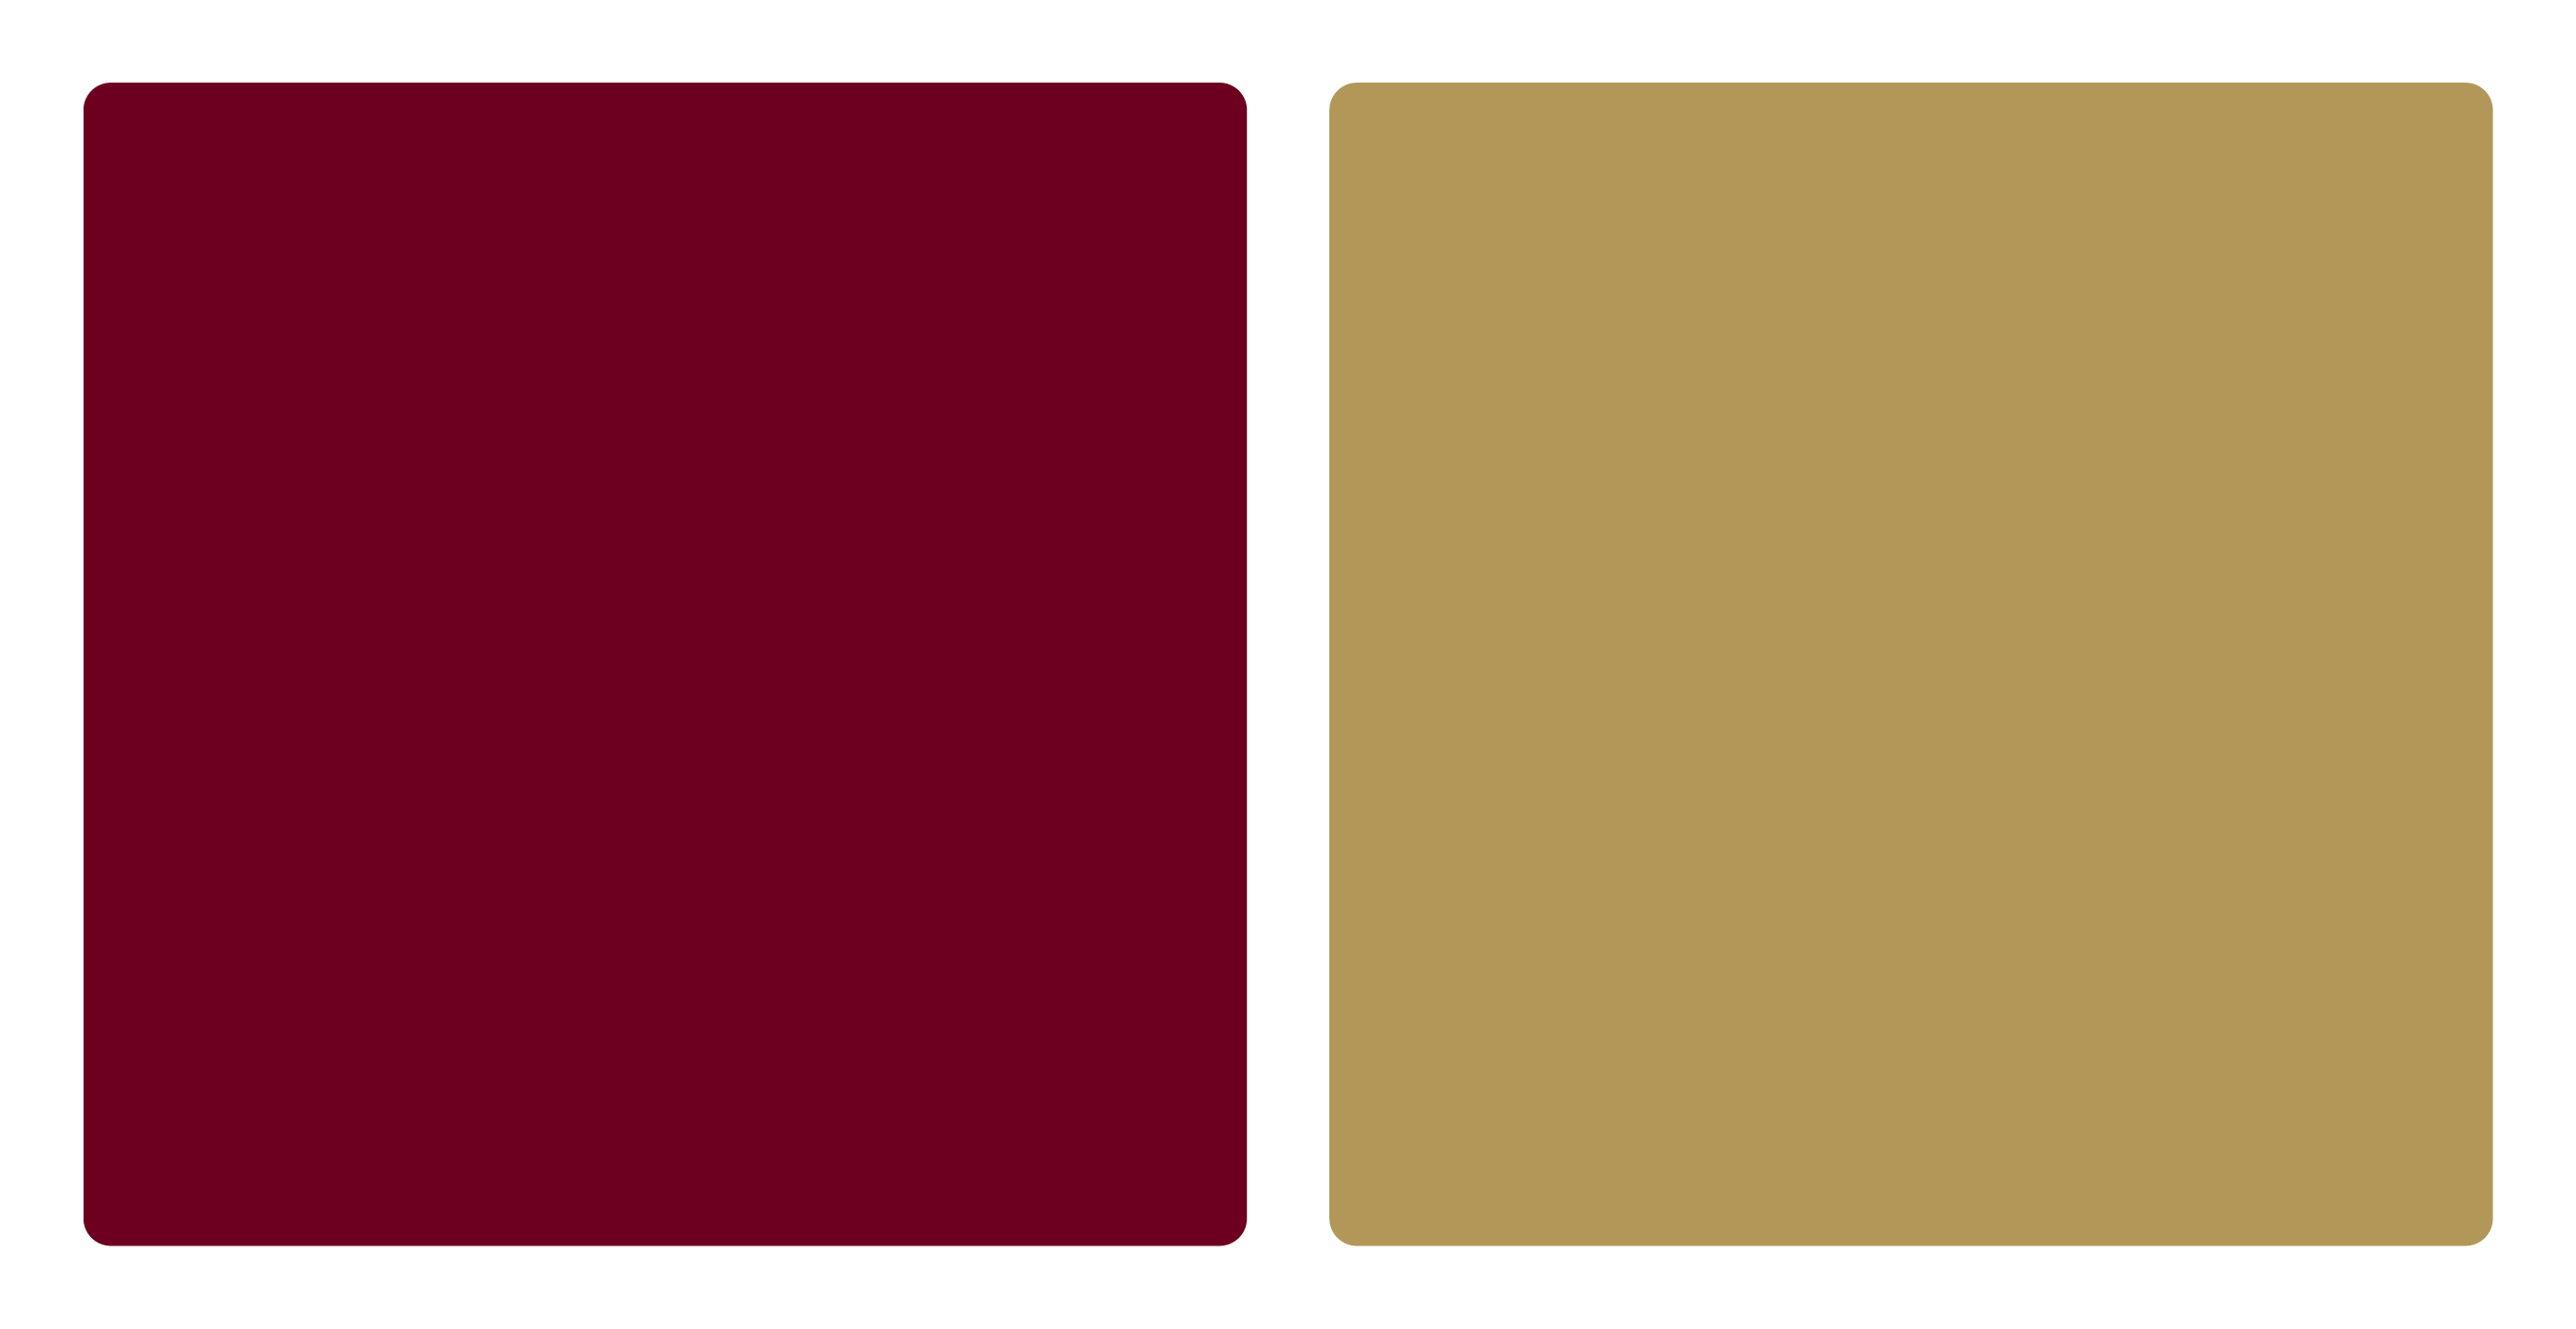 Cleveland Cavaliers flag color codes